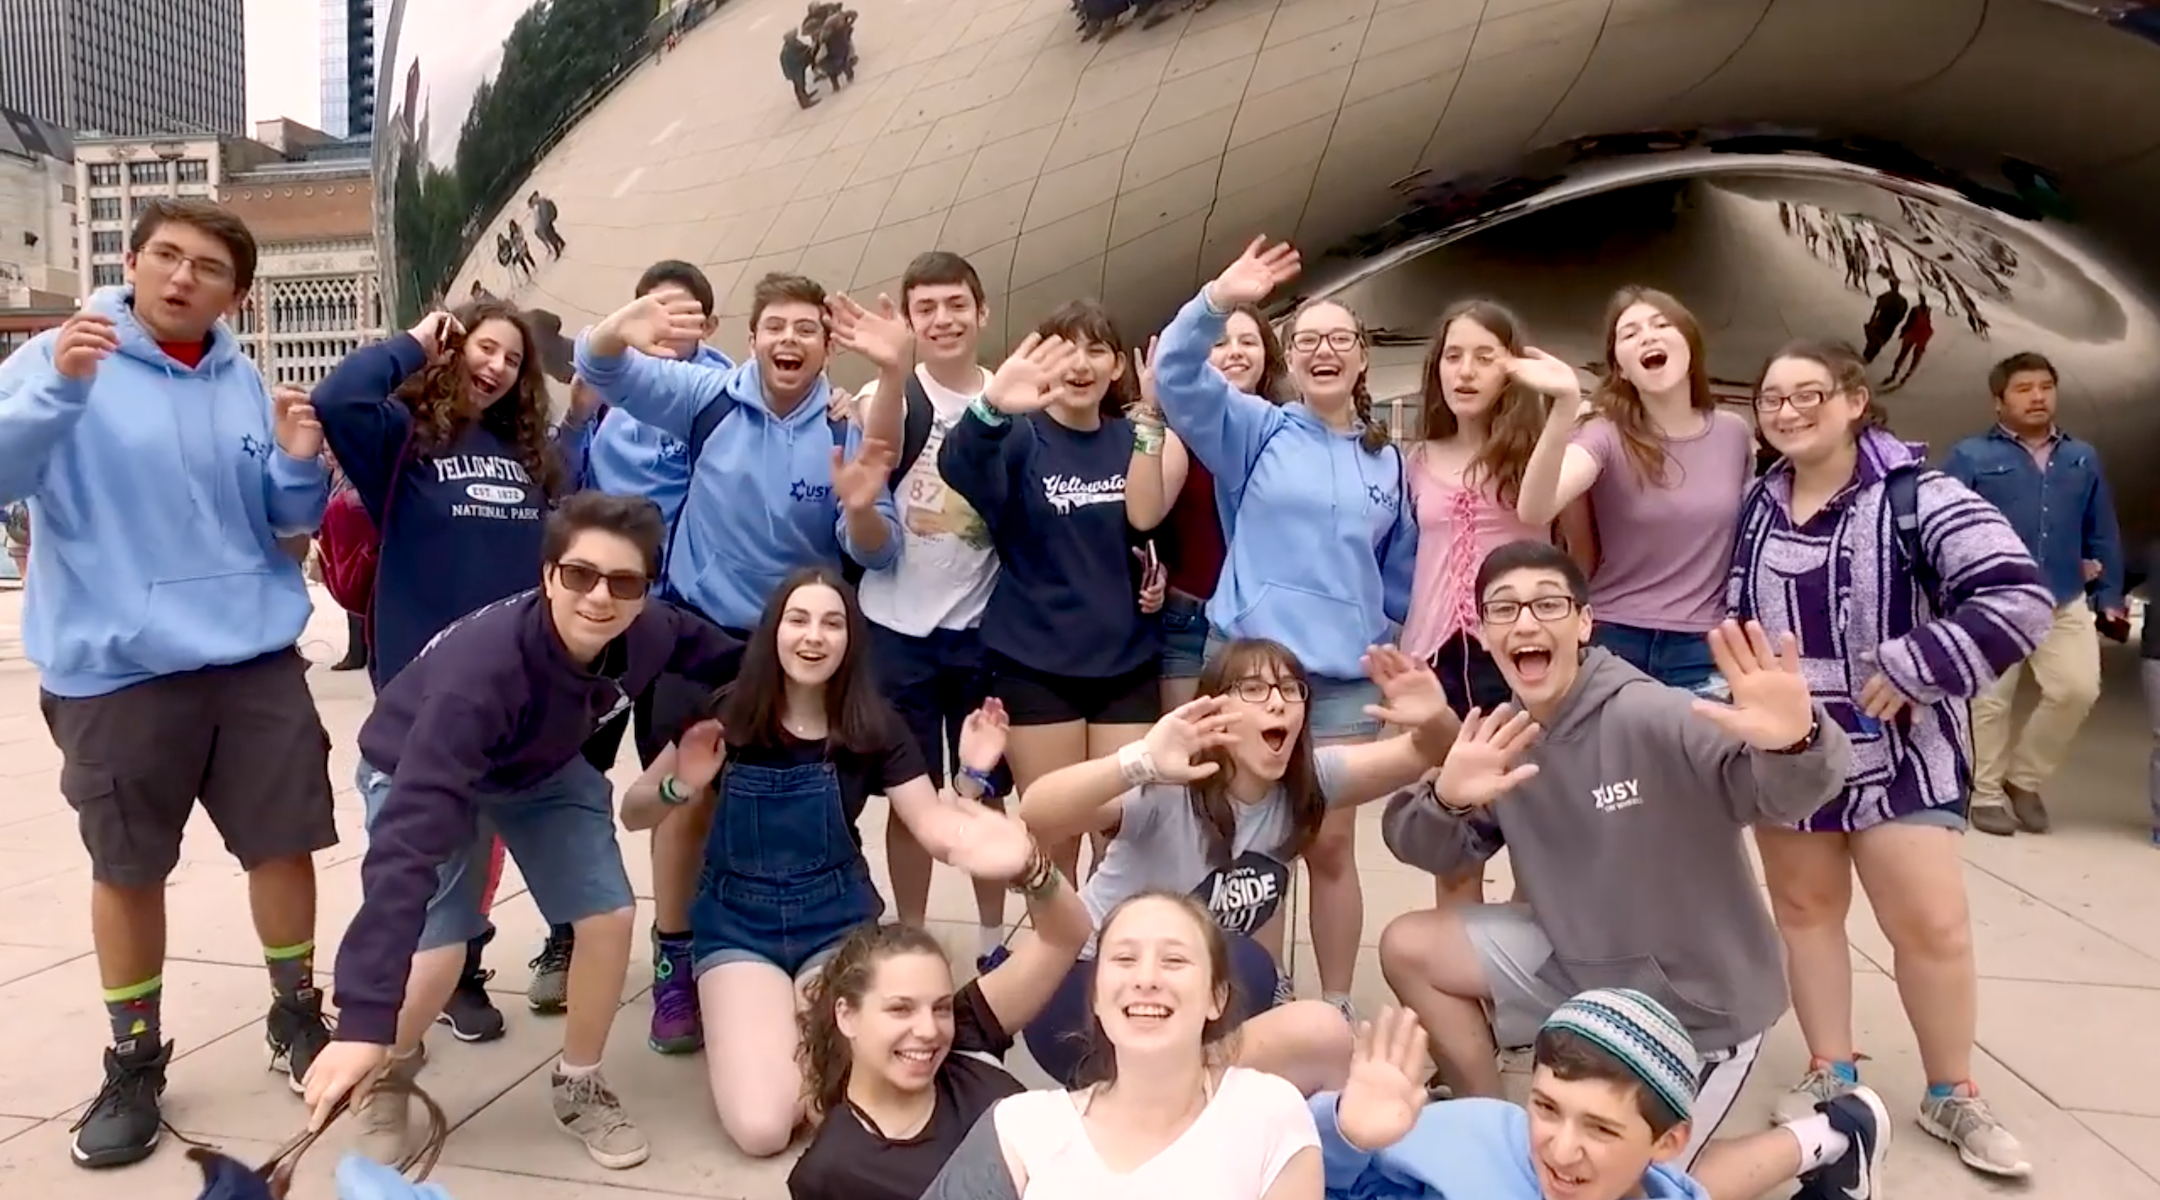 A group of USY members on a visit to Millennium Park in Chicago. (Screenshot from YouTube)